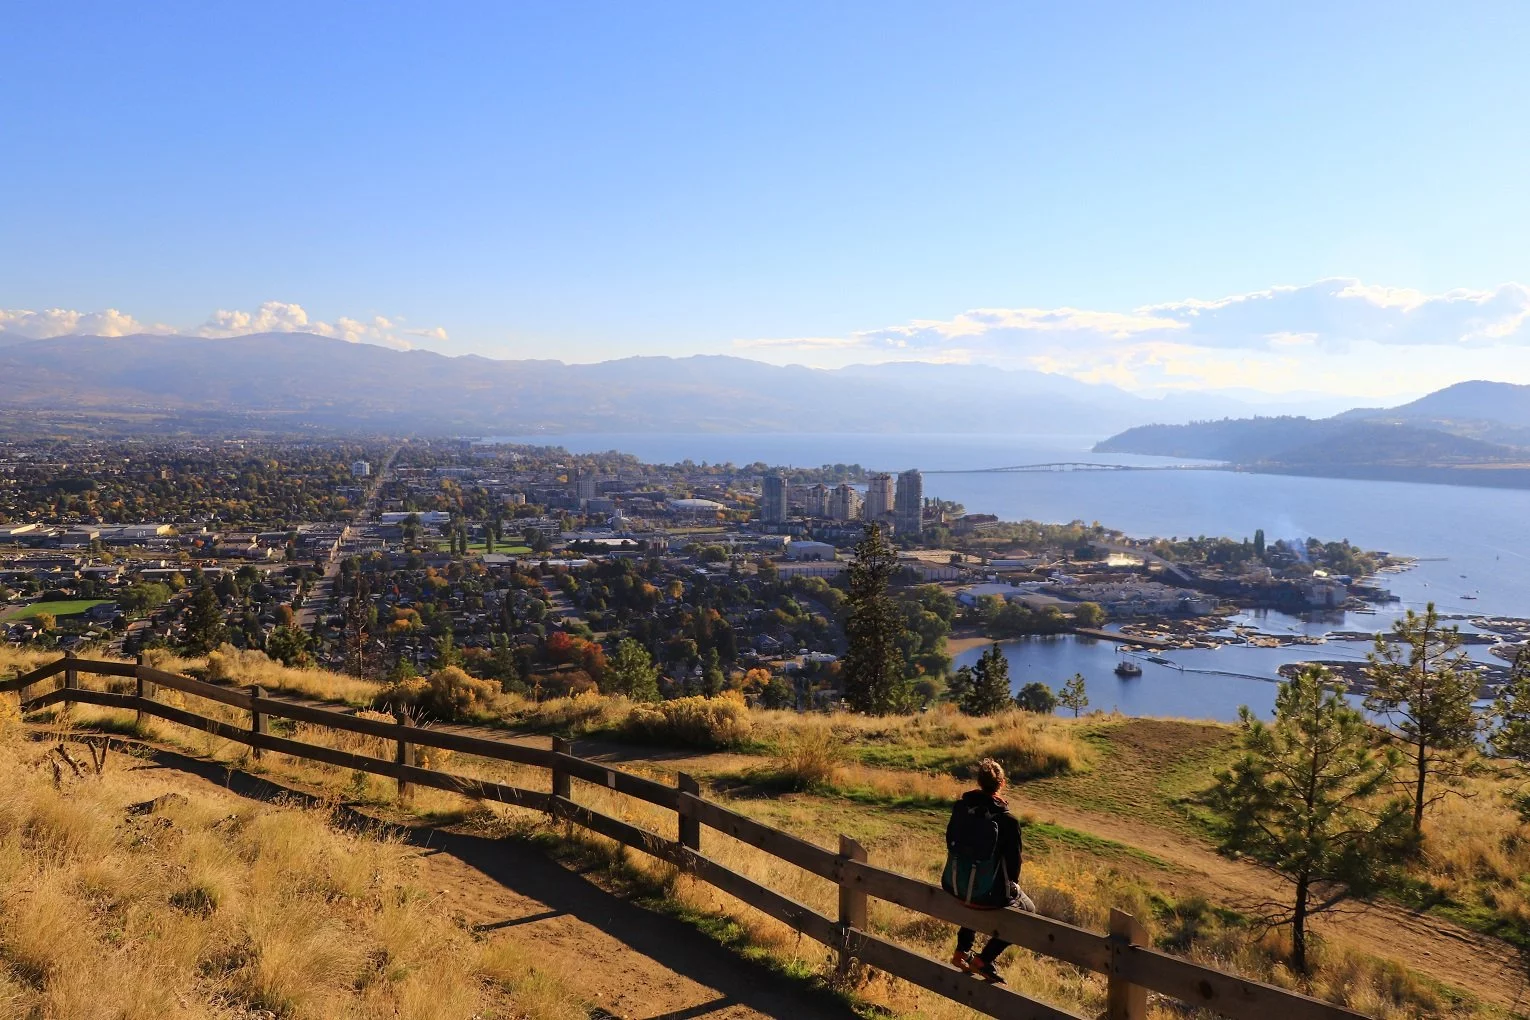 Knox Mountain Apex trail overlooking City of Kelowna travelling Kelowna on a budget